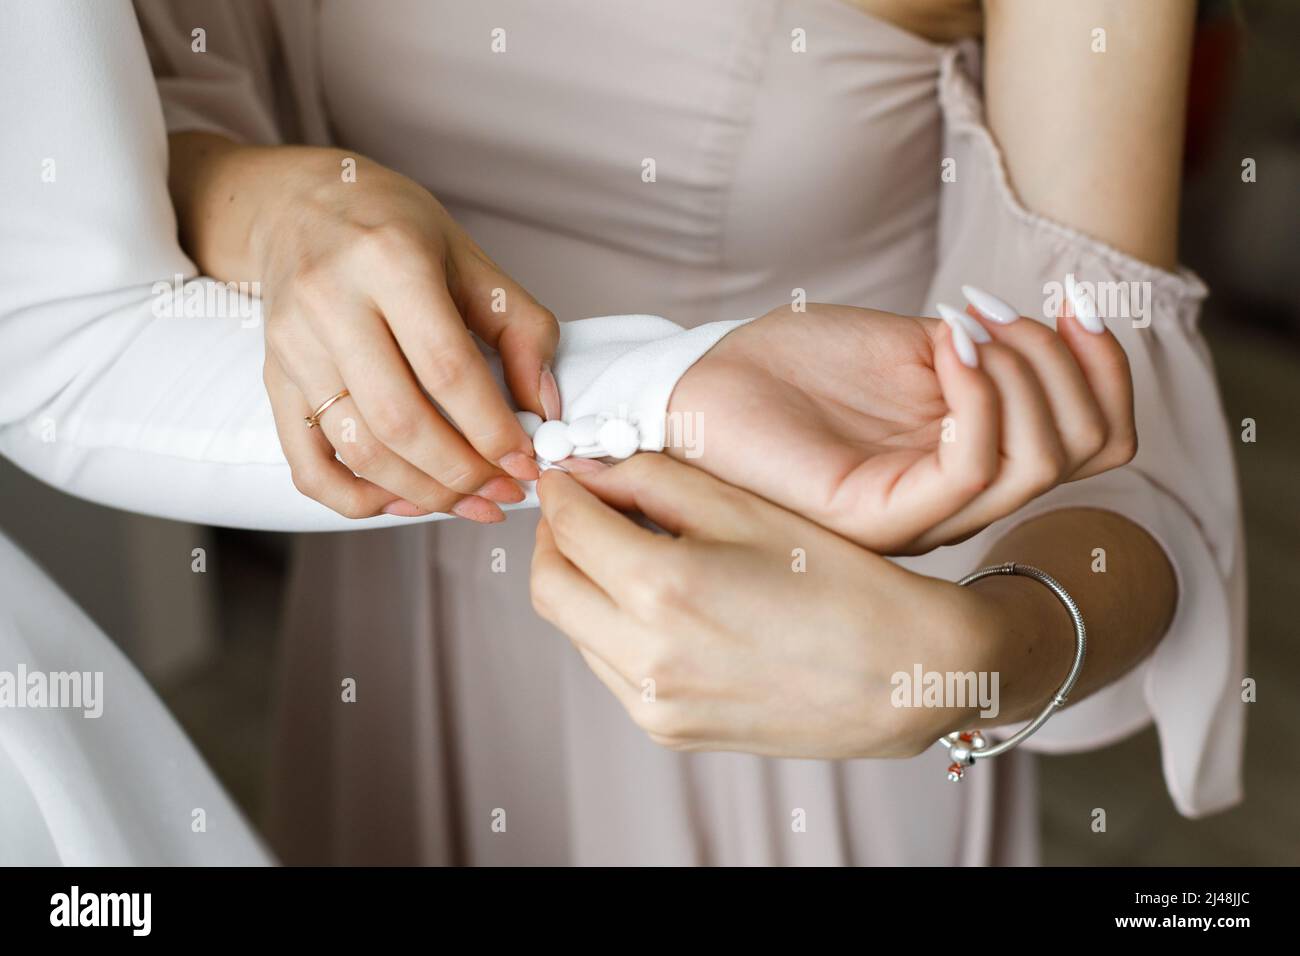 Girlfriend helps the bride to wear a wedding dress by buttoning the sleeves. Stock Photo